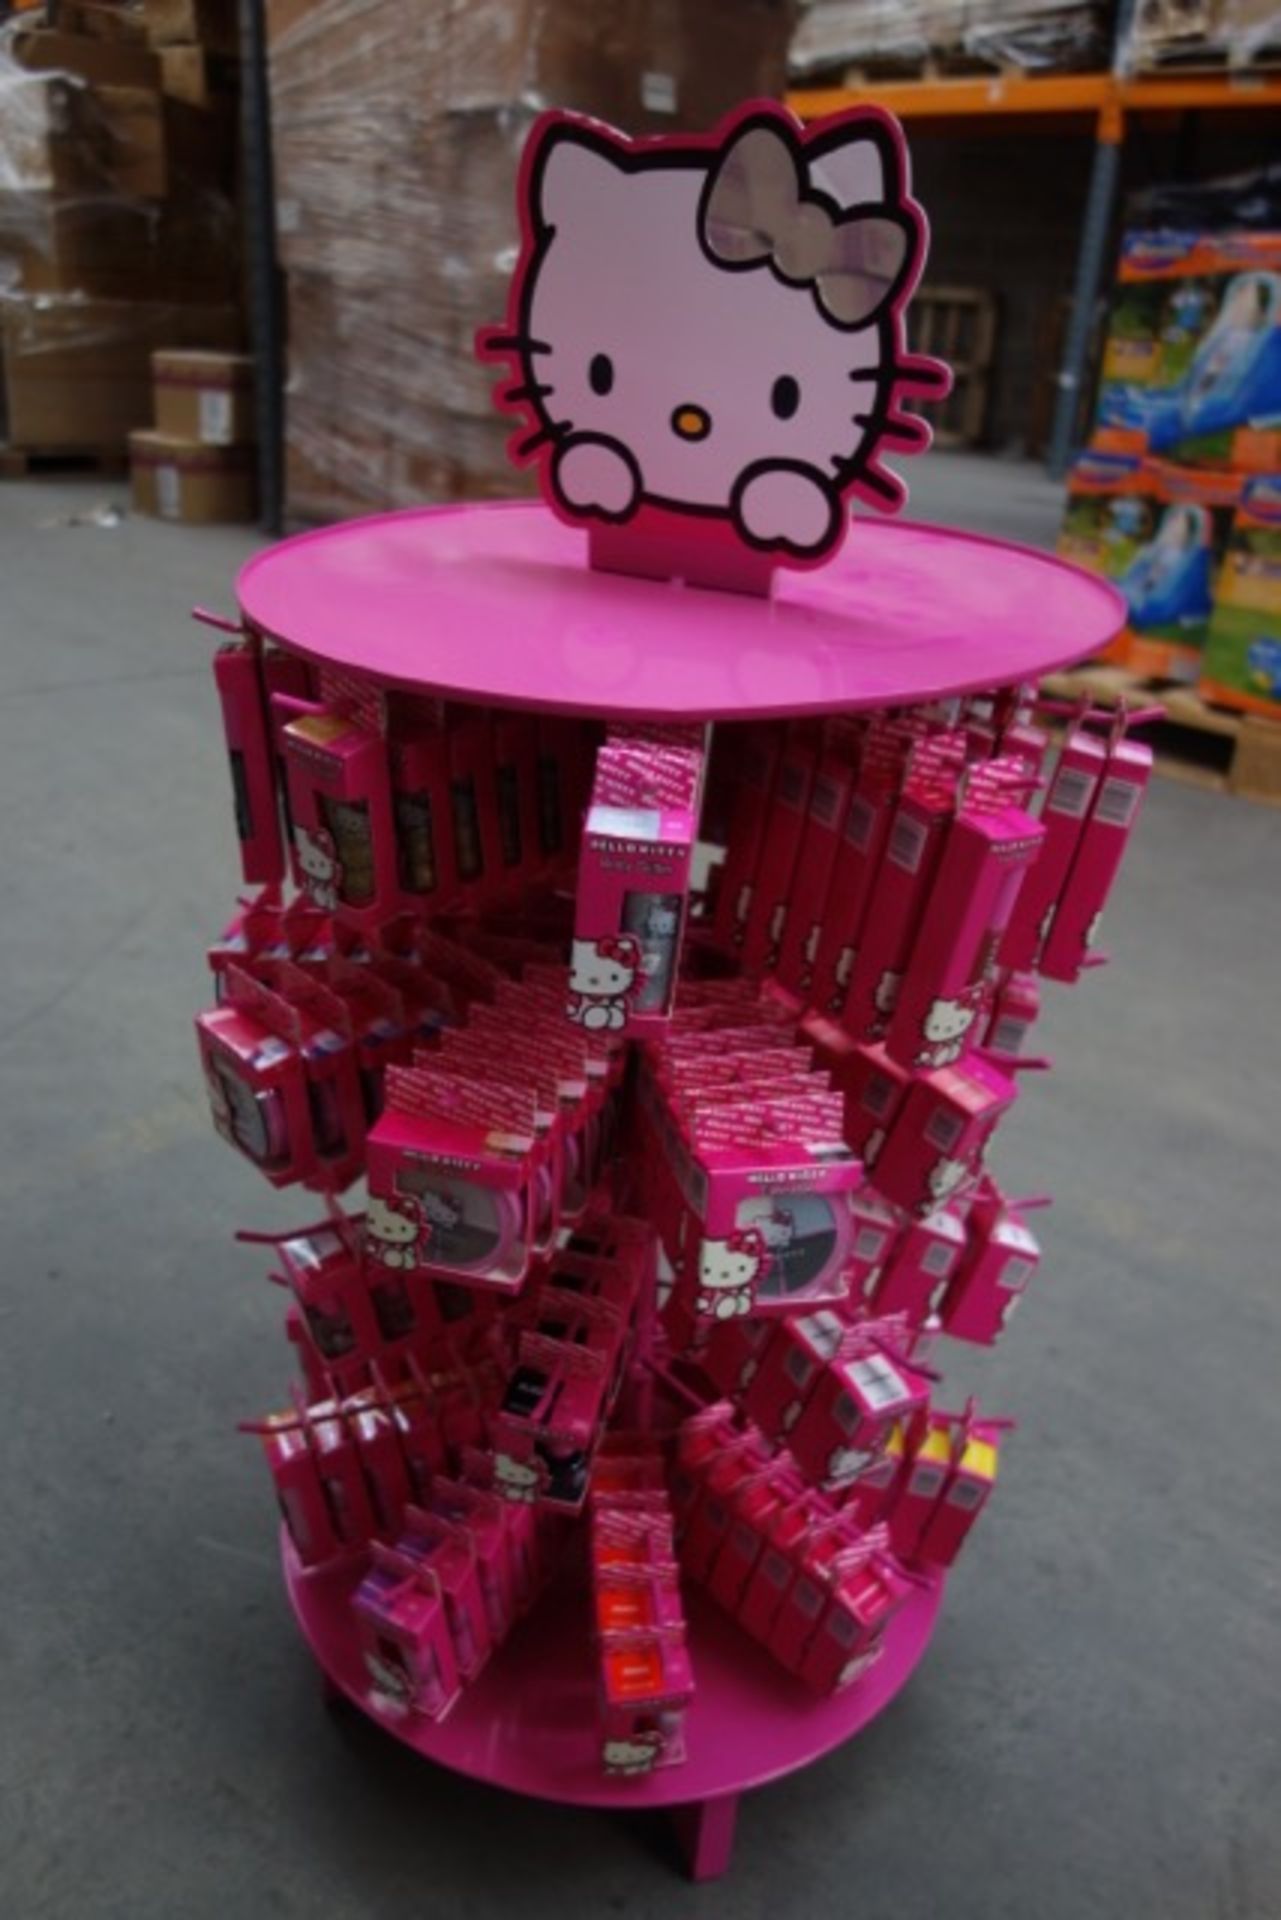 Display Stand Containing Approx. 240 Pieces of Hello Kitty Cosmetics - each with a RRP of £3.50